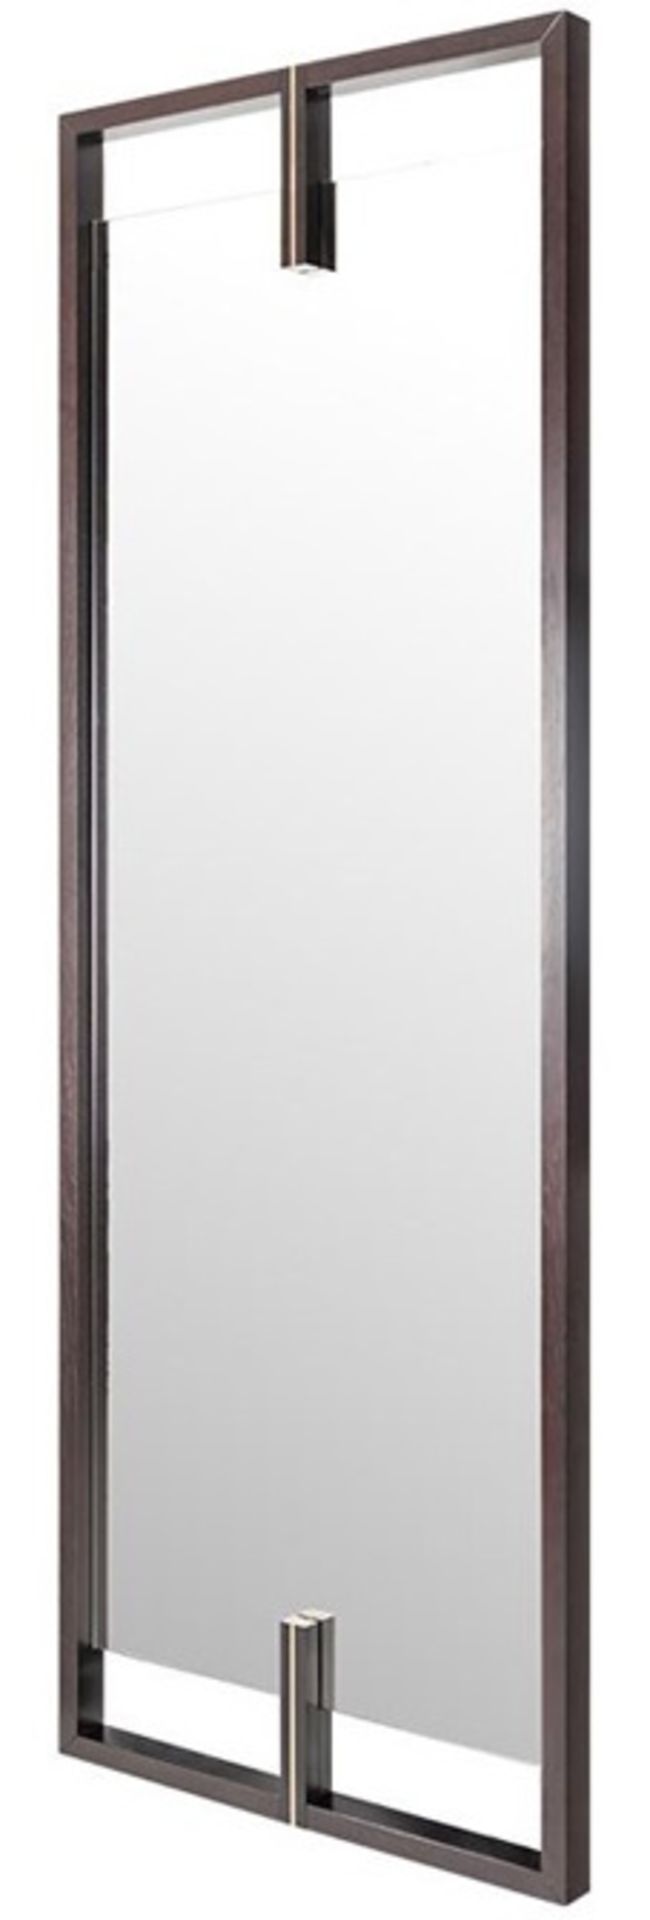 1 x FRATO Lancaster Luxury Mirror With Dark Wood Frame And Brushed Brass Details - RRP £1,288